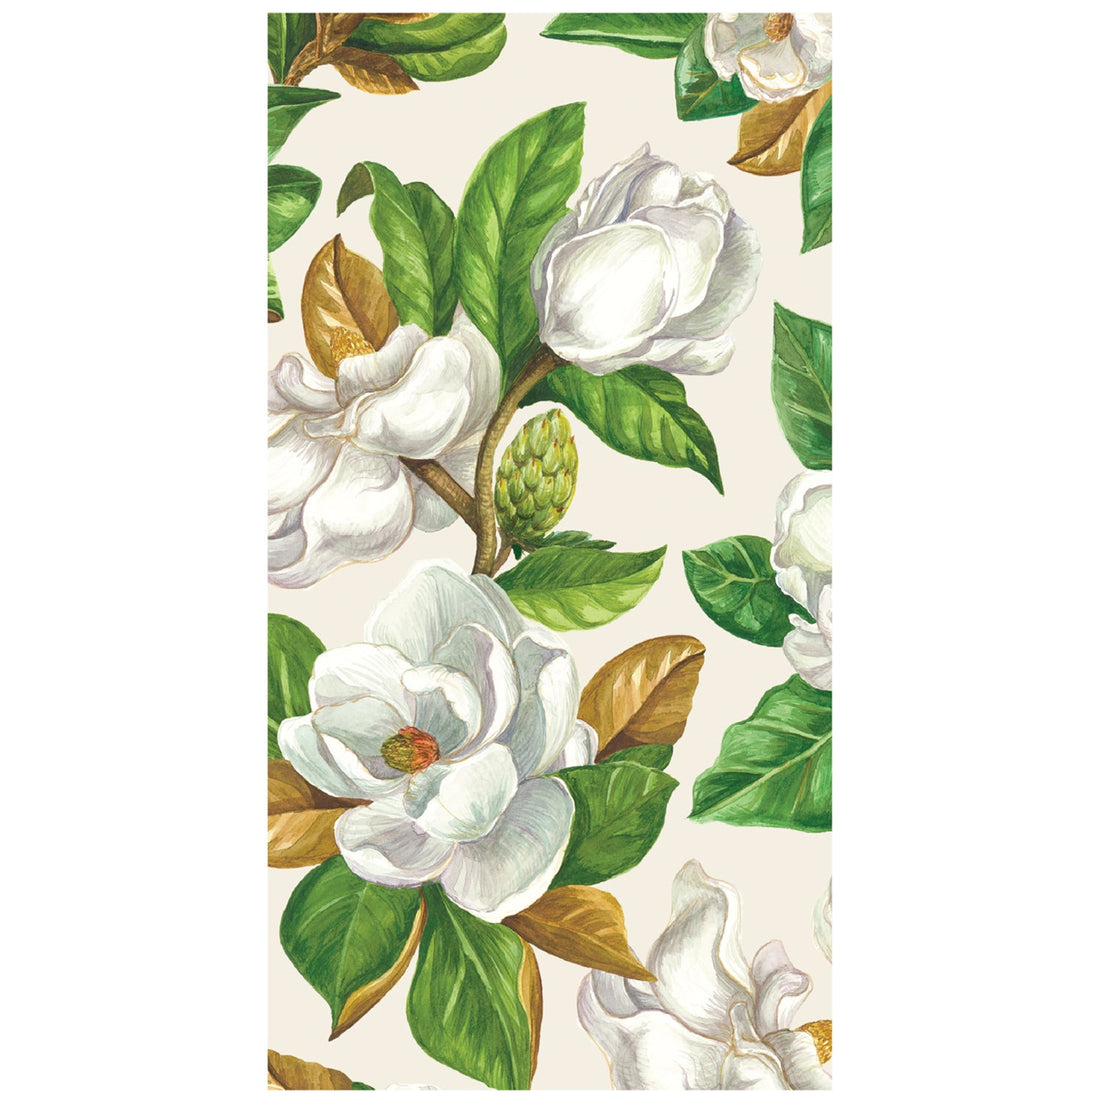 A rectangle guest napkin featuring illustrated white magnolia blossoms with brown and green leaves and stems, on a white background.